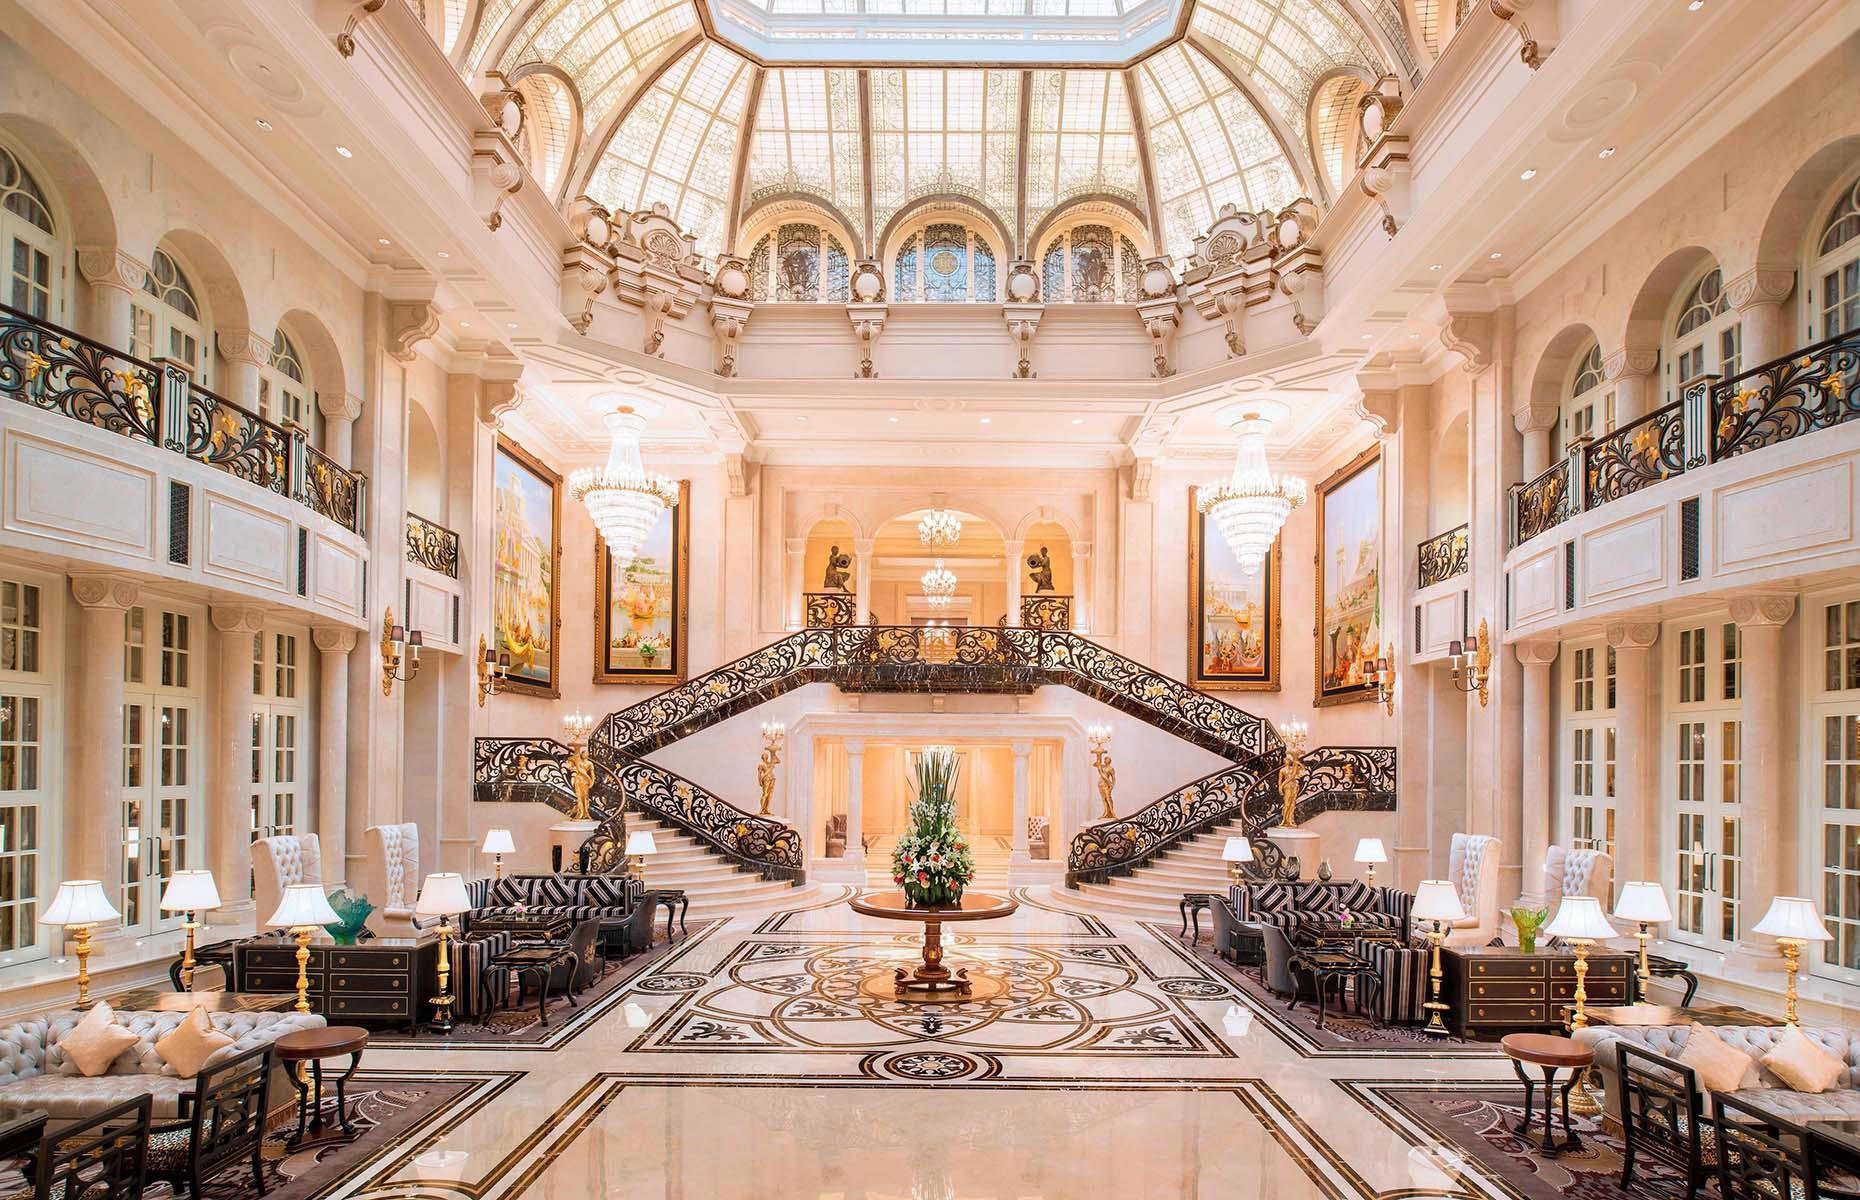 In Pictures: The World's Most Beautiful Hotel Lobbies